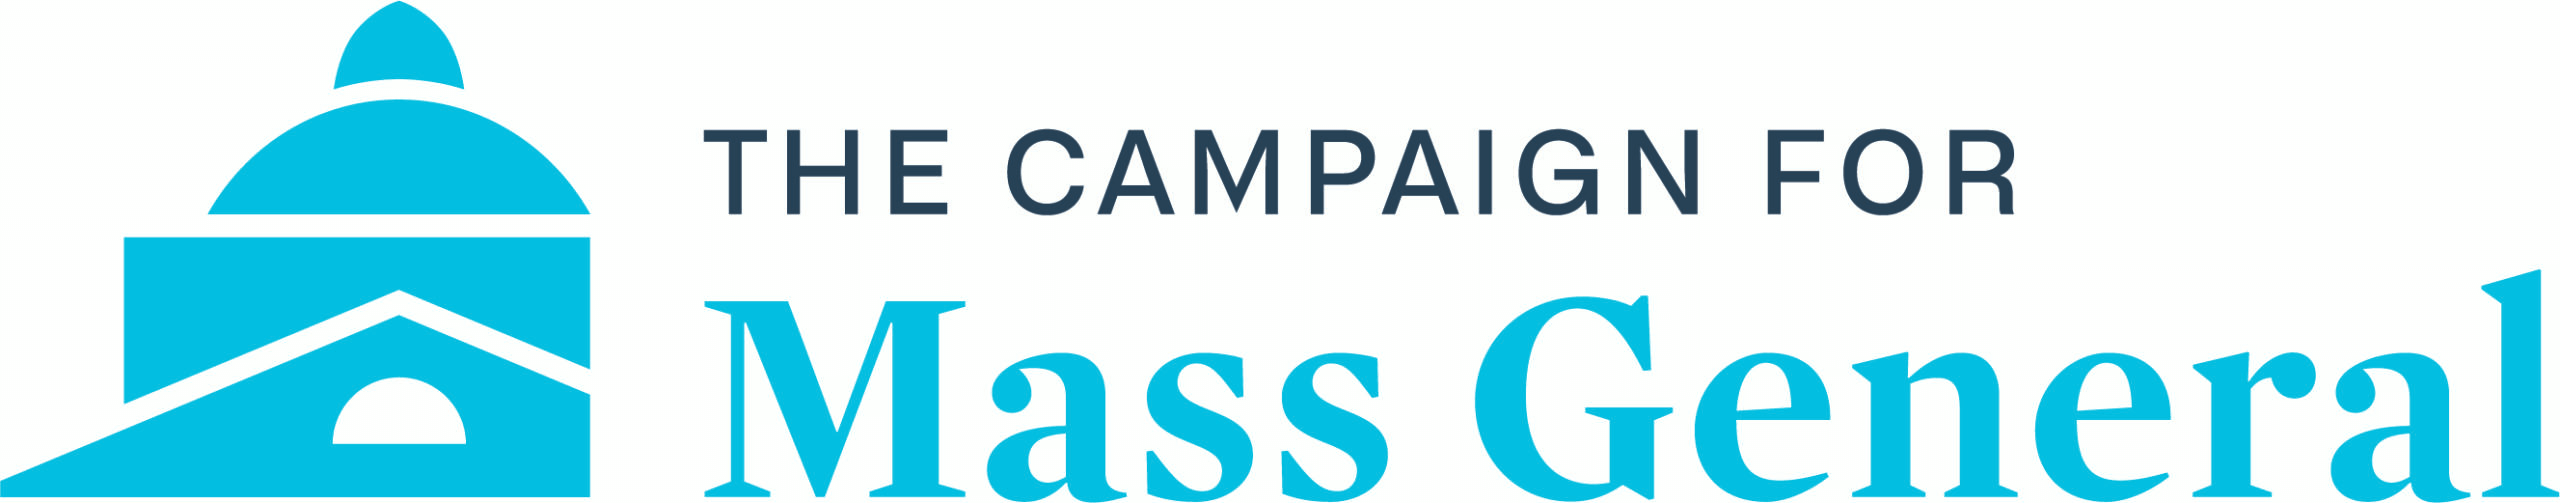 Campaign for Mass General logo